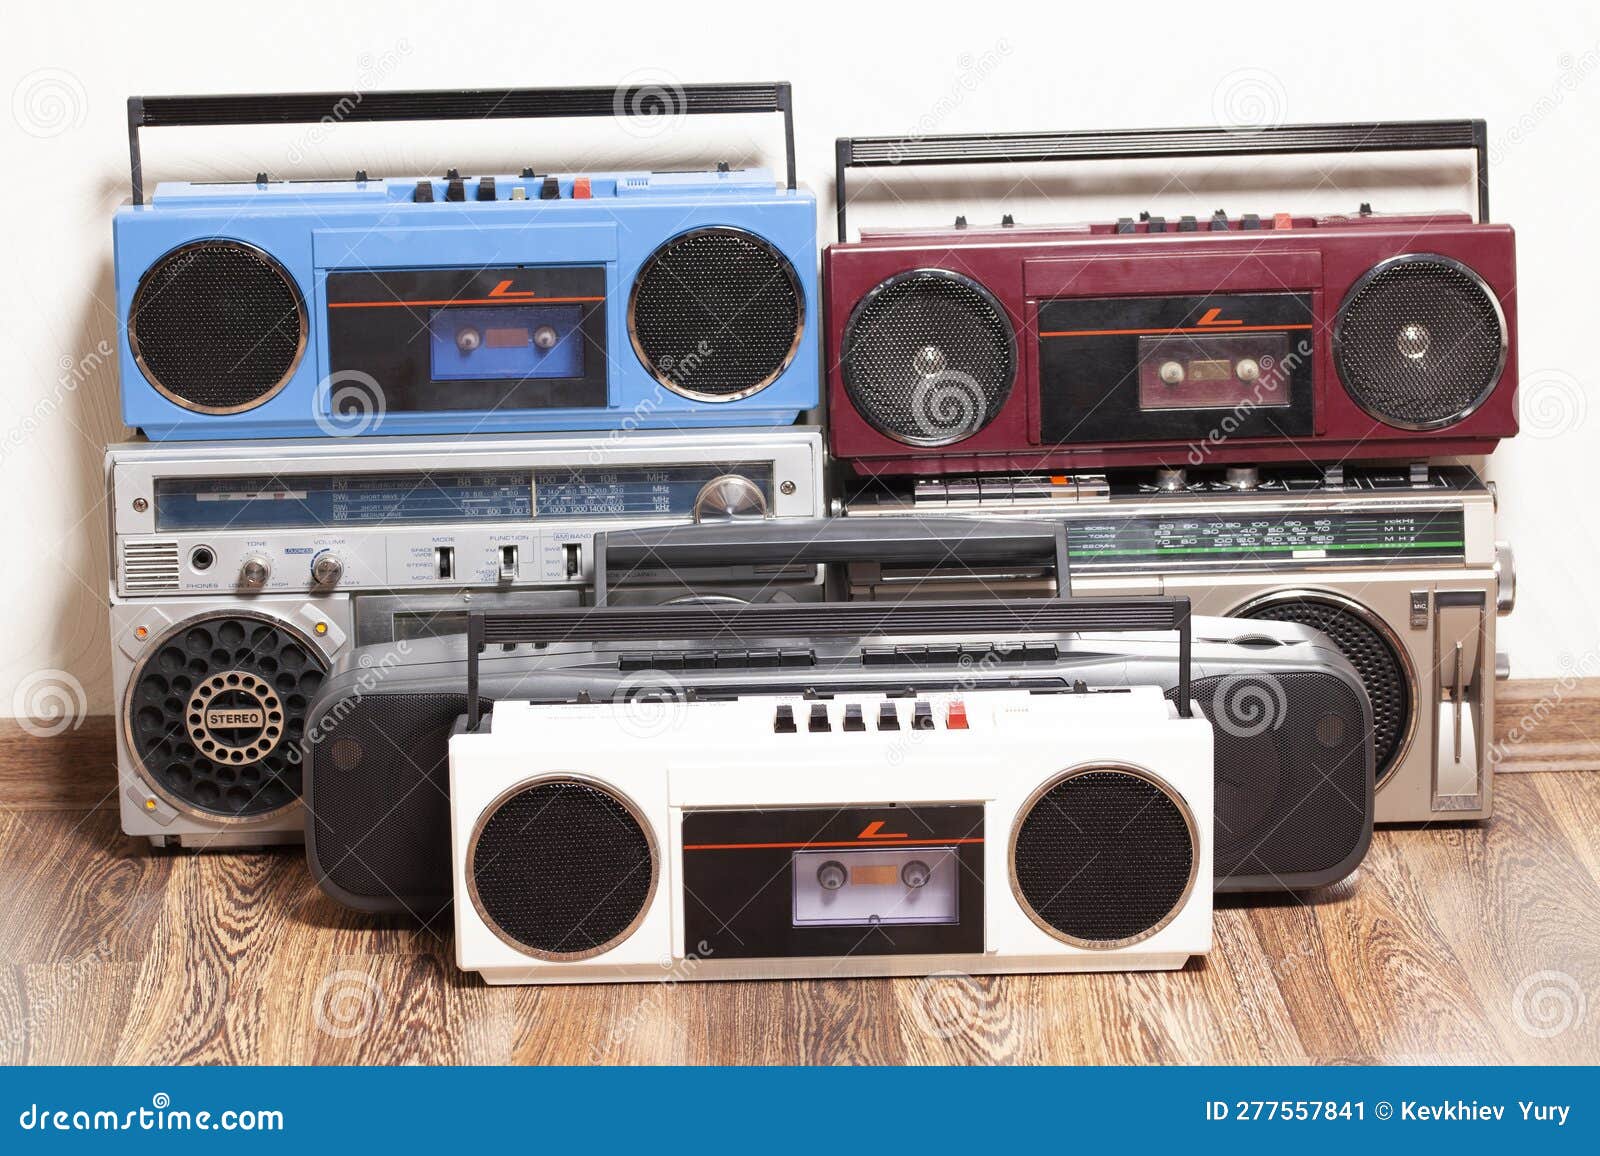 Collection of Old Tape Recorders Stock Image - Image of boombox, white:  277557841